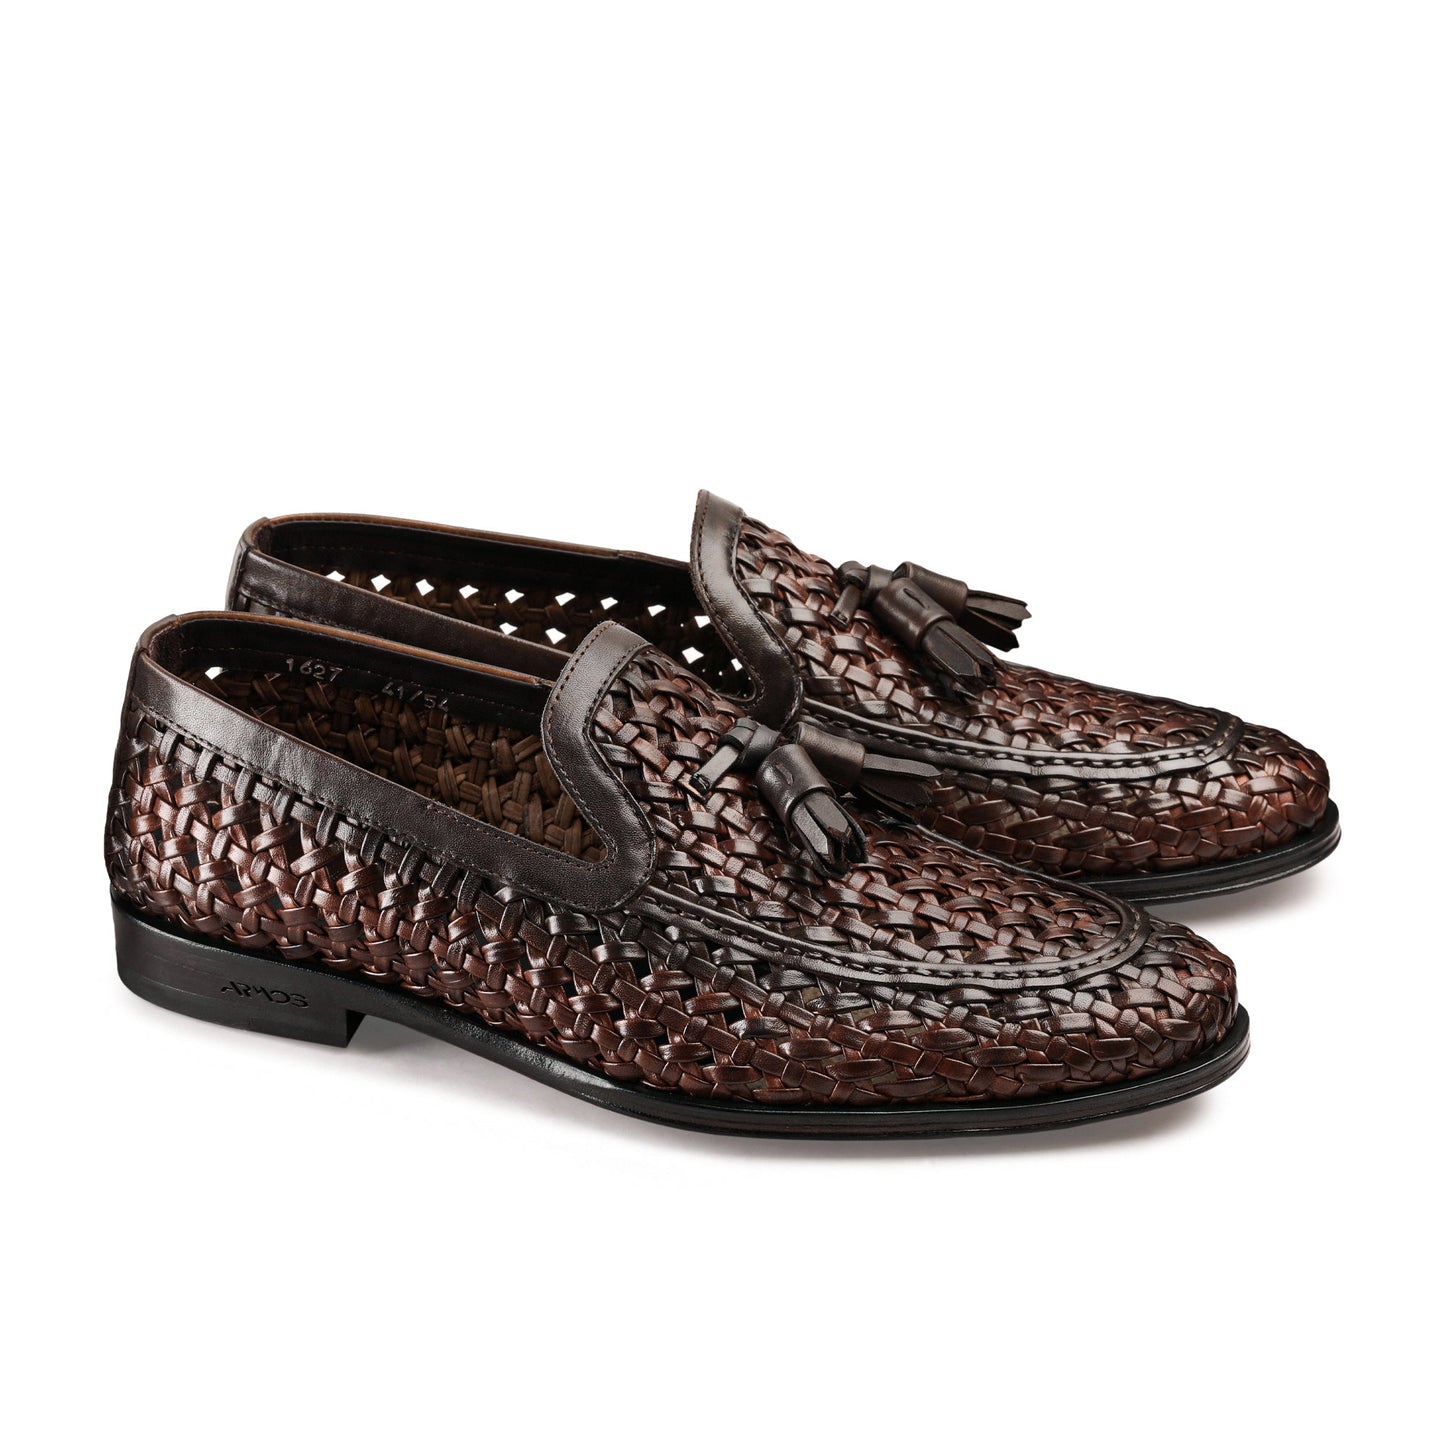 Woven loafers